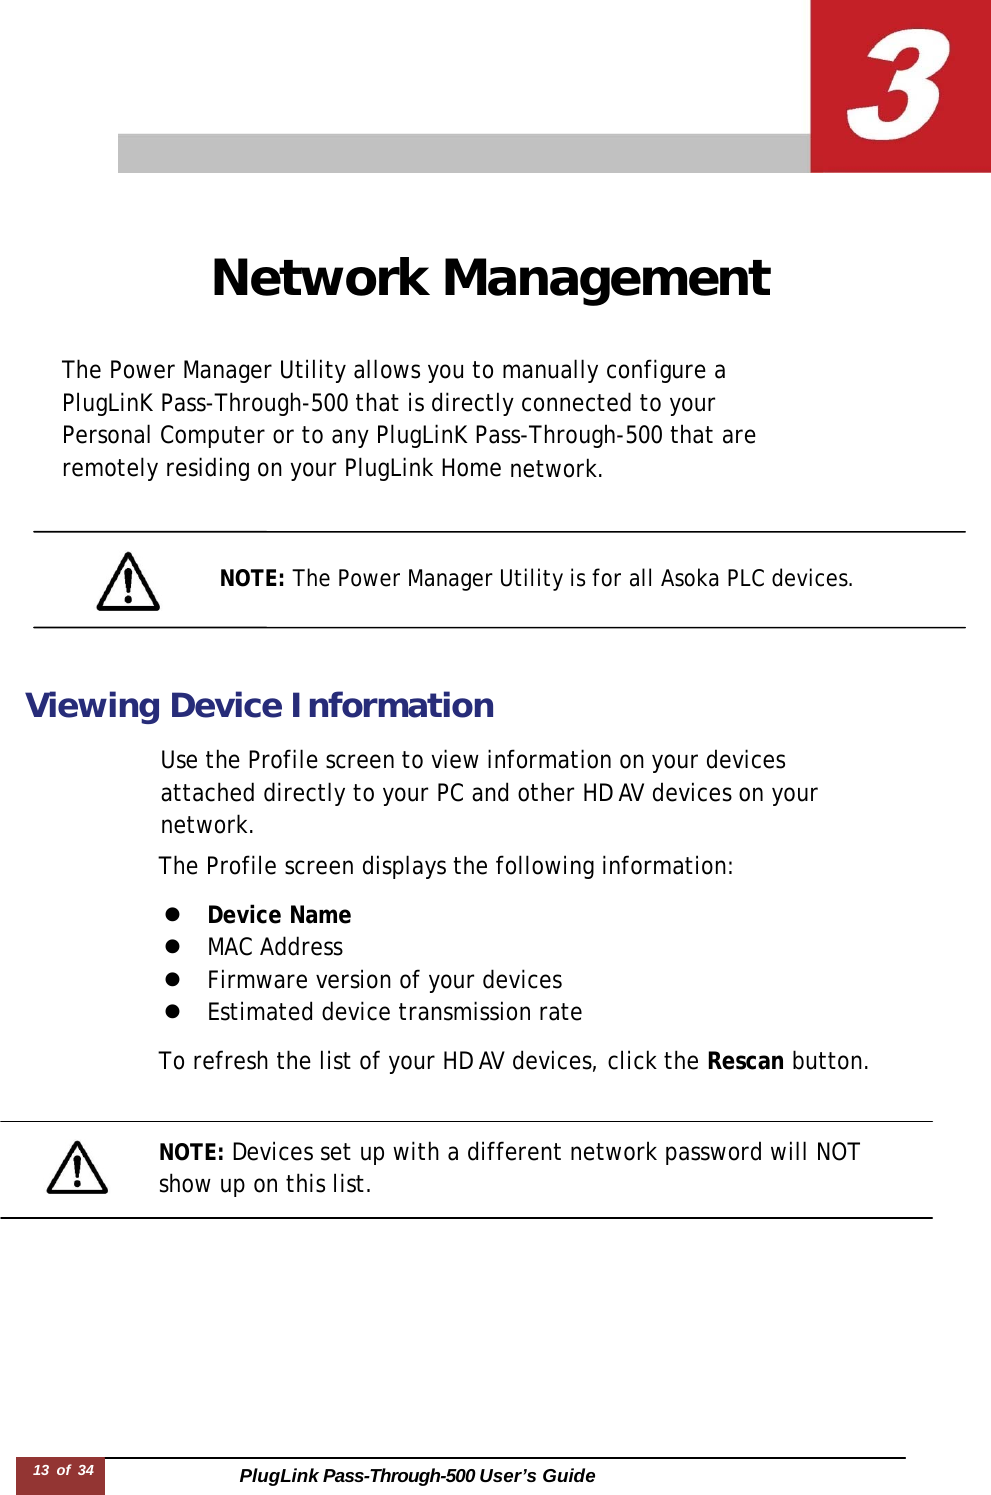 PlugLink Pass-Through-500 User’s Guide 13 of 34       Network Management   The Power Manager Utility allows you to manually configure a PlugLinK Pass-Through-500 that is directly connected to your Personal Computer or to any PlugLinK Pass-Through-500 that are remotely residing on your PlugLink Home network.     NOTE: The Power Manager Utility is for all Asoka PLC devices.     Viewing Device Information  Use the Profile screen to view information on your devices attached directly to your PC and other HD AV devices on your network. The Profile screen displays the following information:  z  Device Name z  MAC Address z  Firmware version of your devices z  Estimated device transmission rate  To refresh the list of your HD AV devices, click the Rescan button.    NOTE: Devices set up with a different network password will NOT show up on this list. 